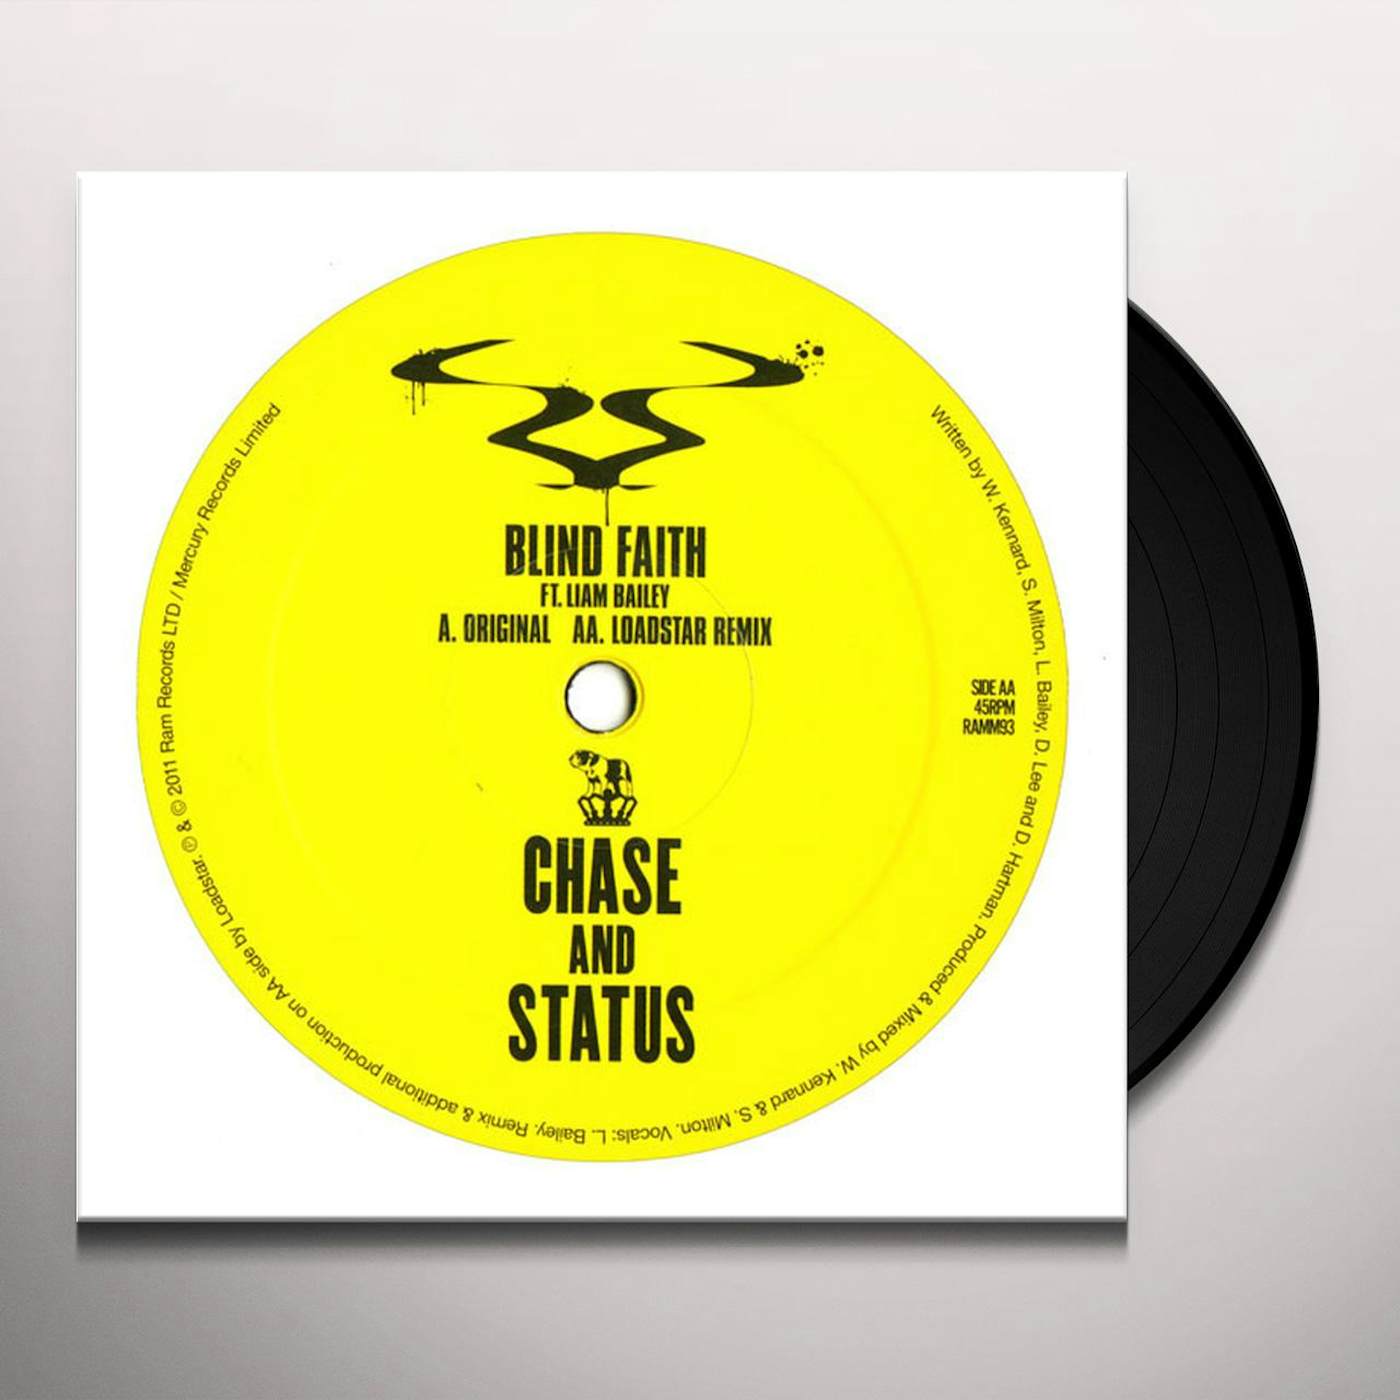 Chase & Status BLIND FAITH FT. LIAM BAILEY Vinyl Record - UK Release